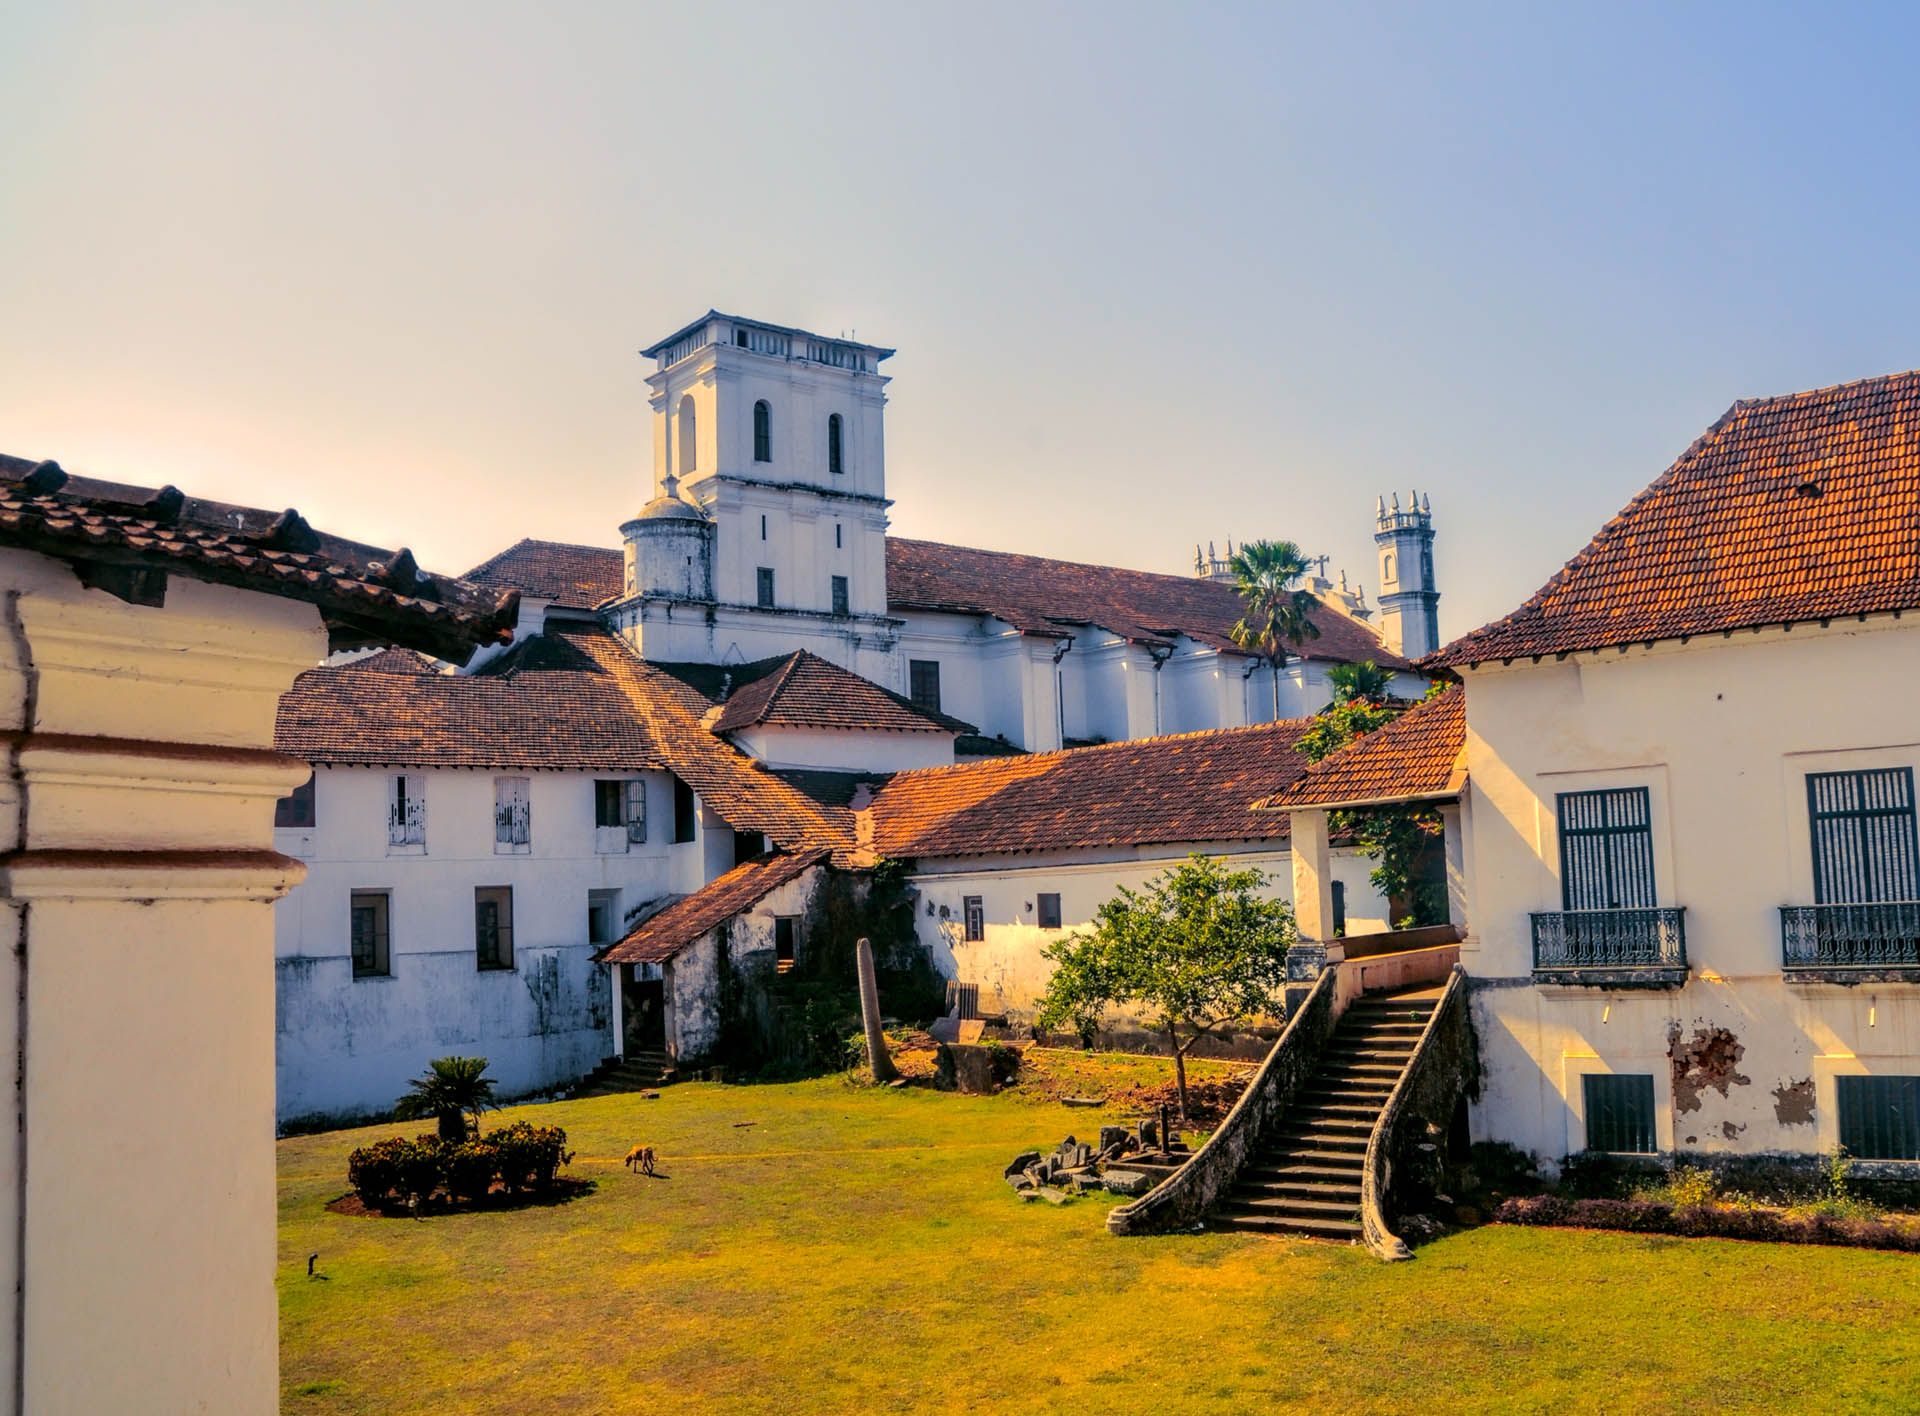 Scenic yard and old houses in historical town of Old Goa in India © Shutterstock